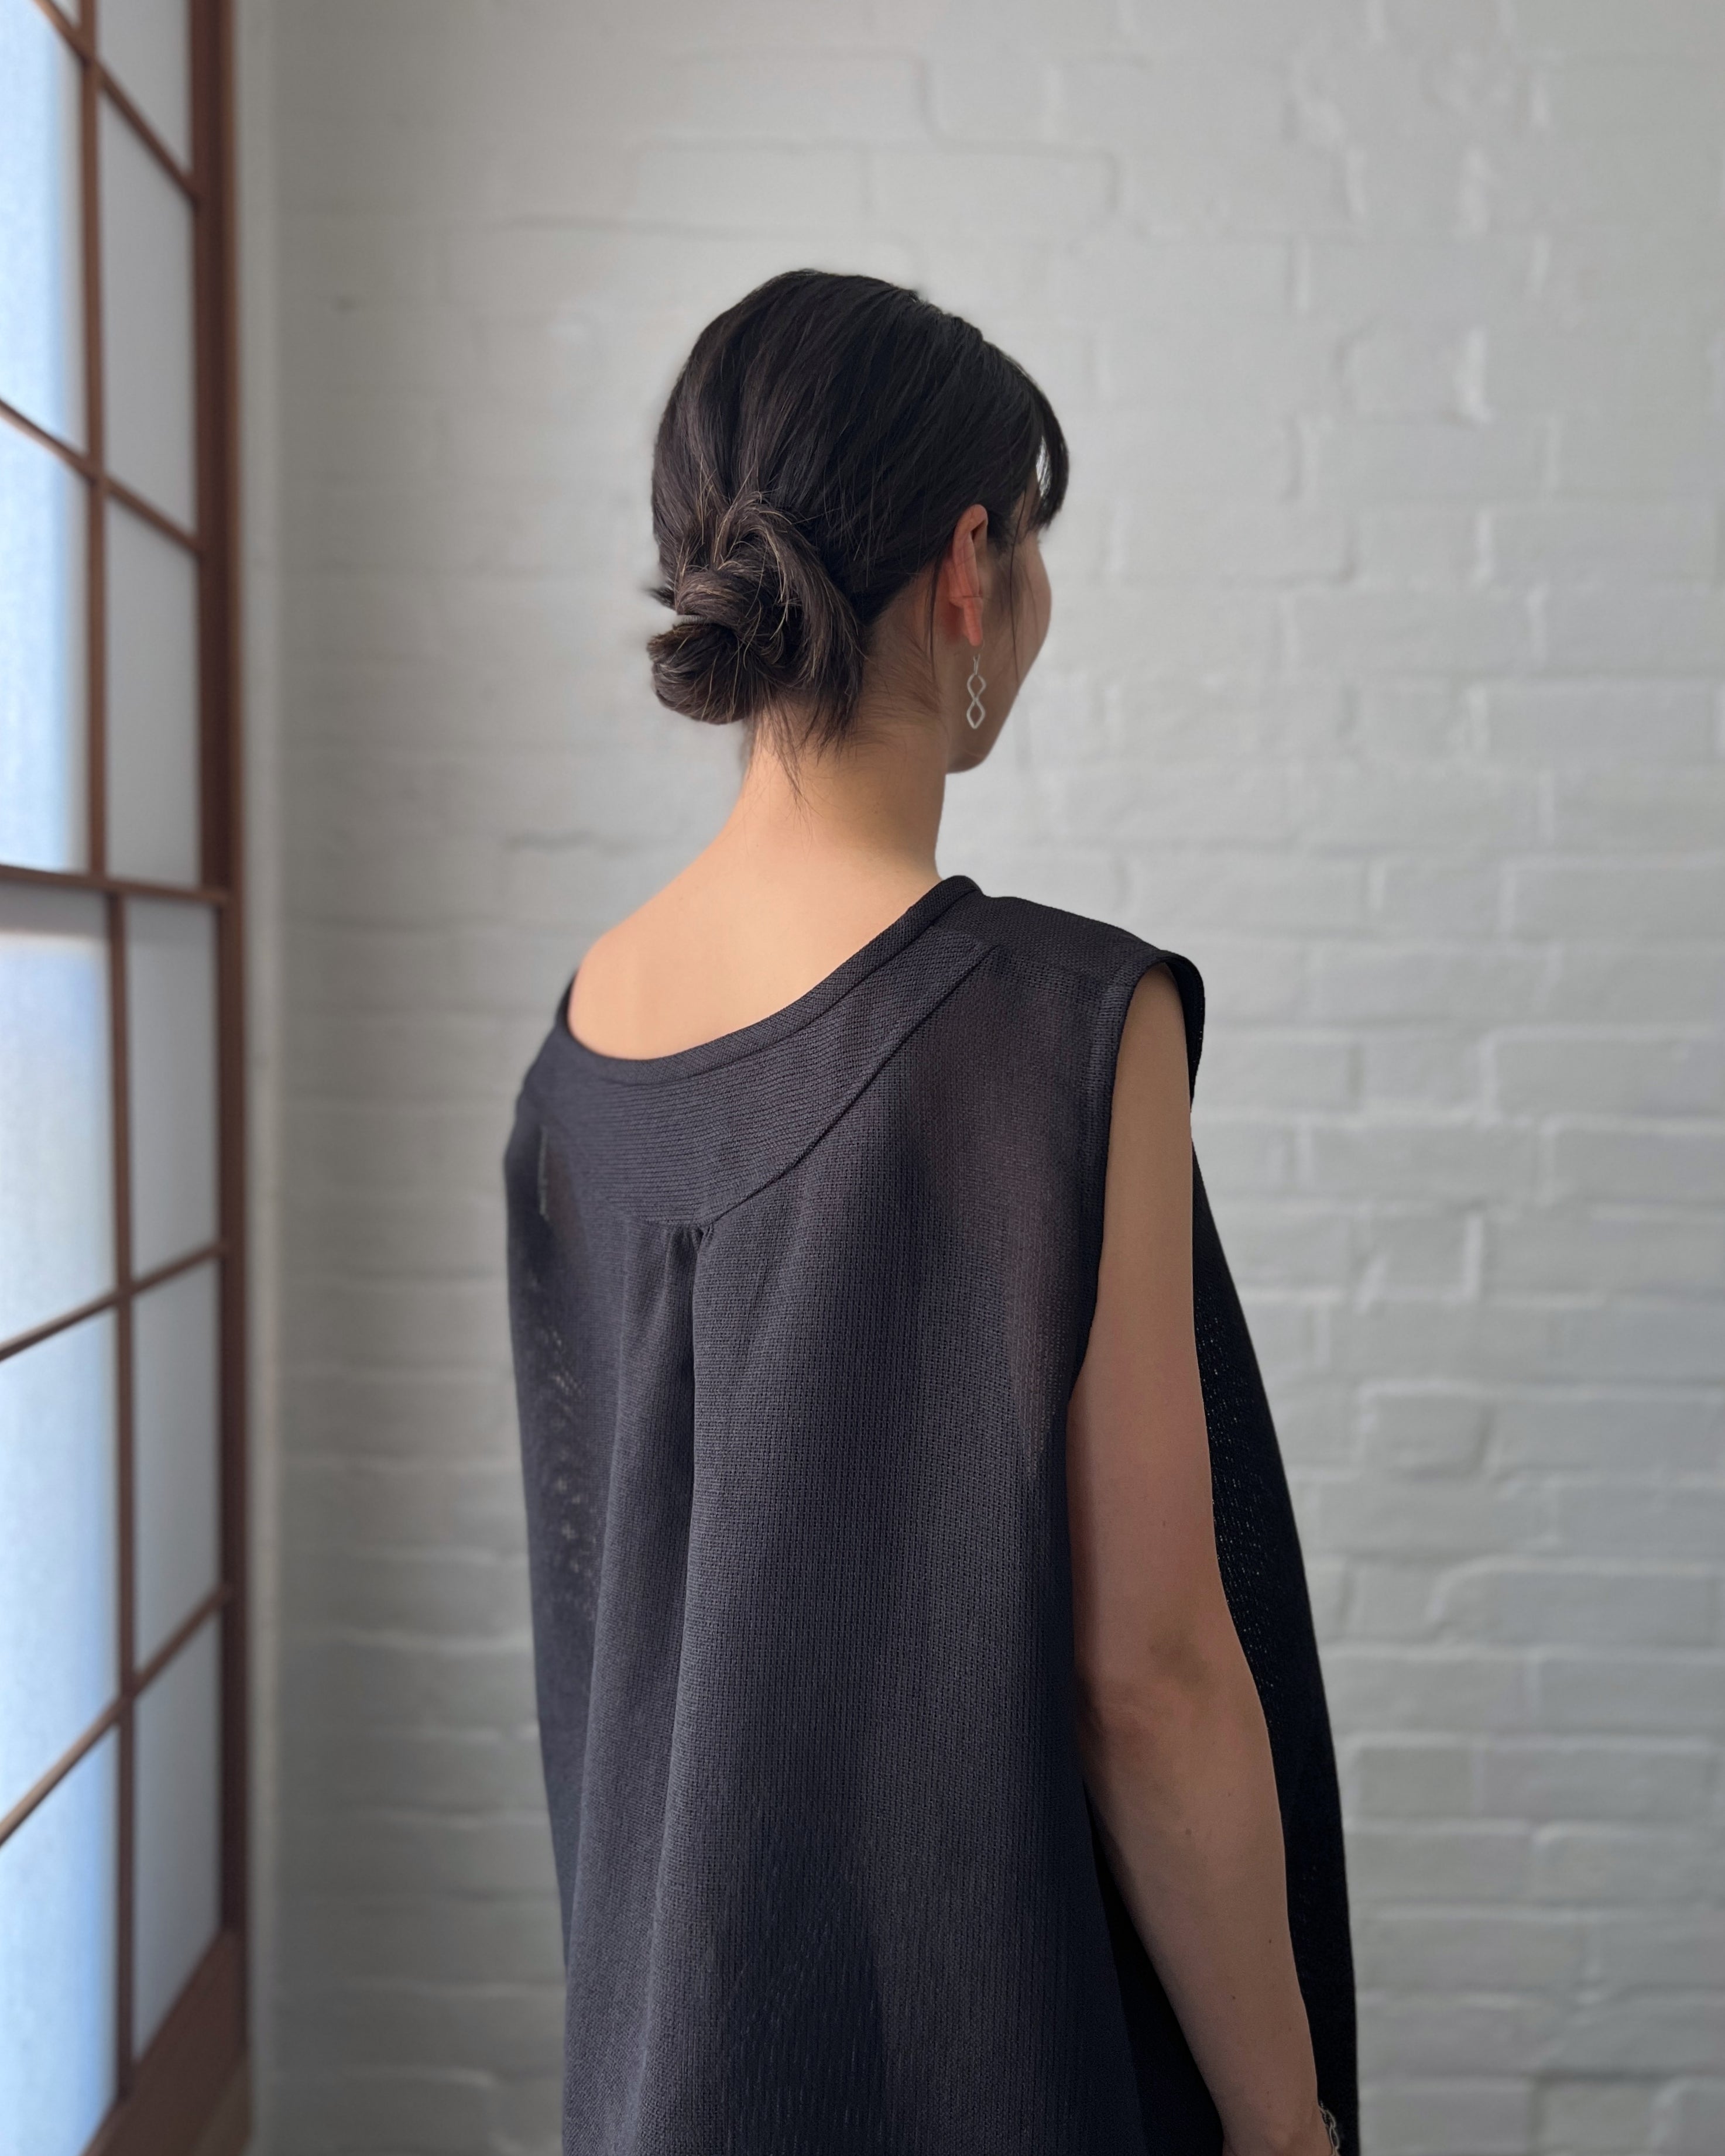 LJ struthers : structural linen tunic